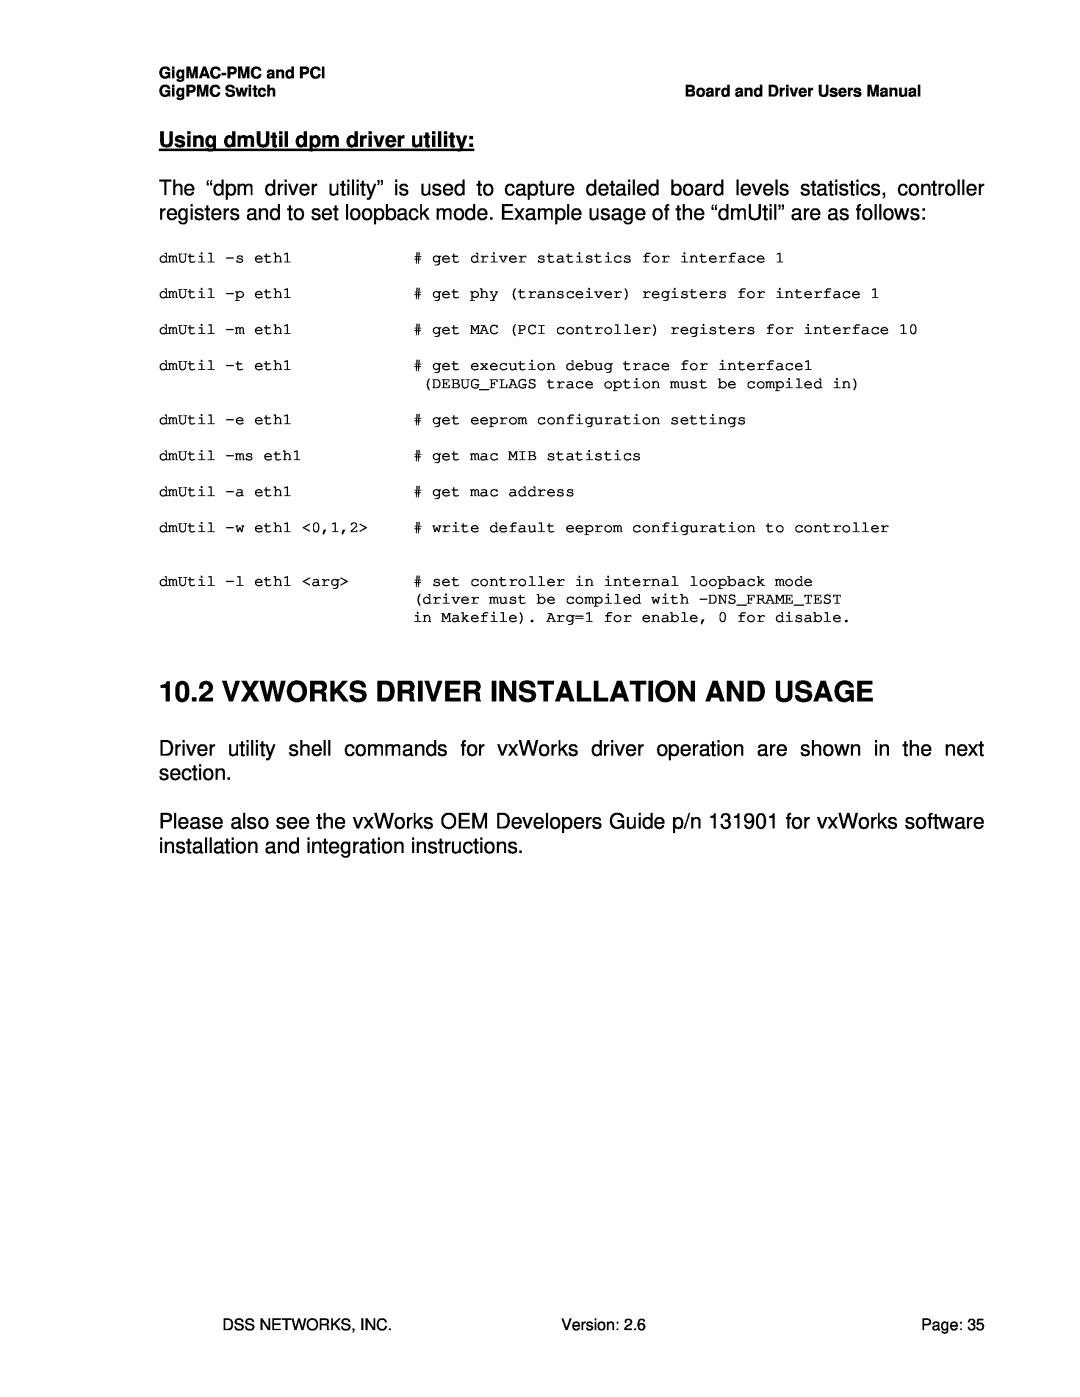 Intel PCI-X user manual Vxworks Driver Installation And Usage, Using dmUtil dpm driver utility 